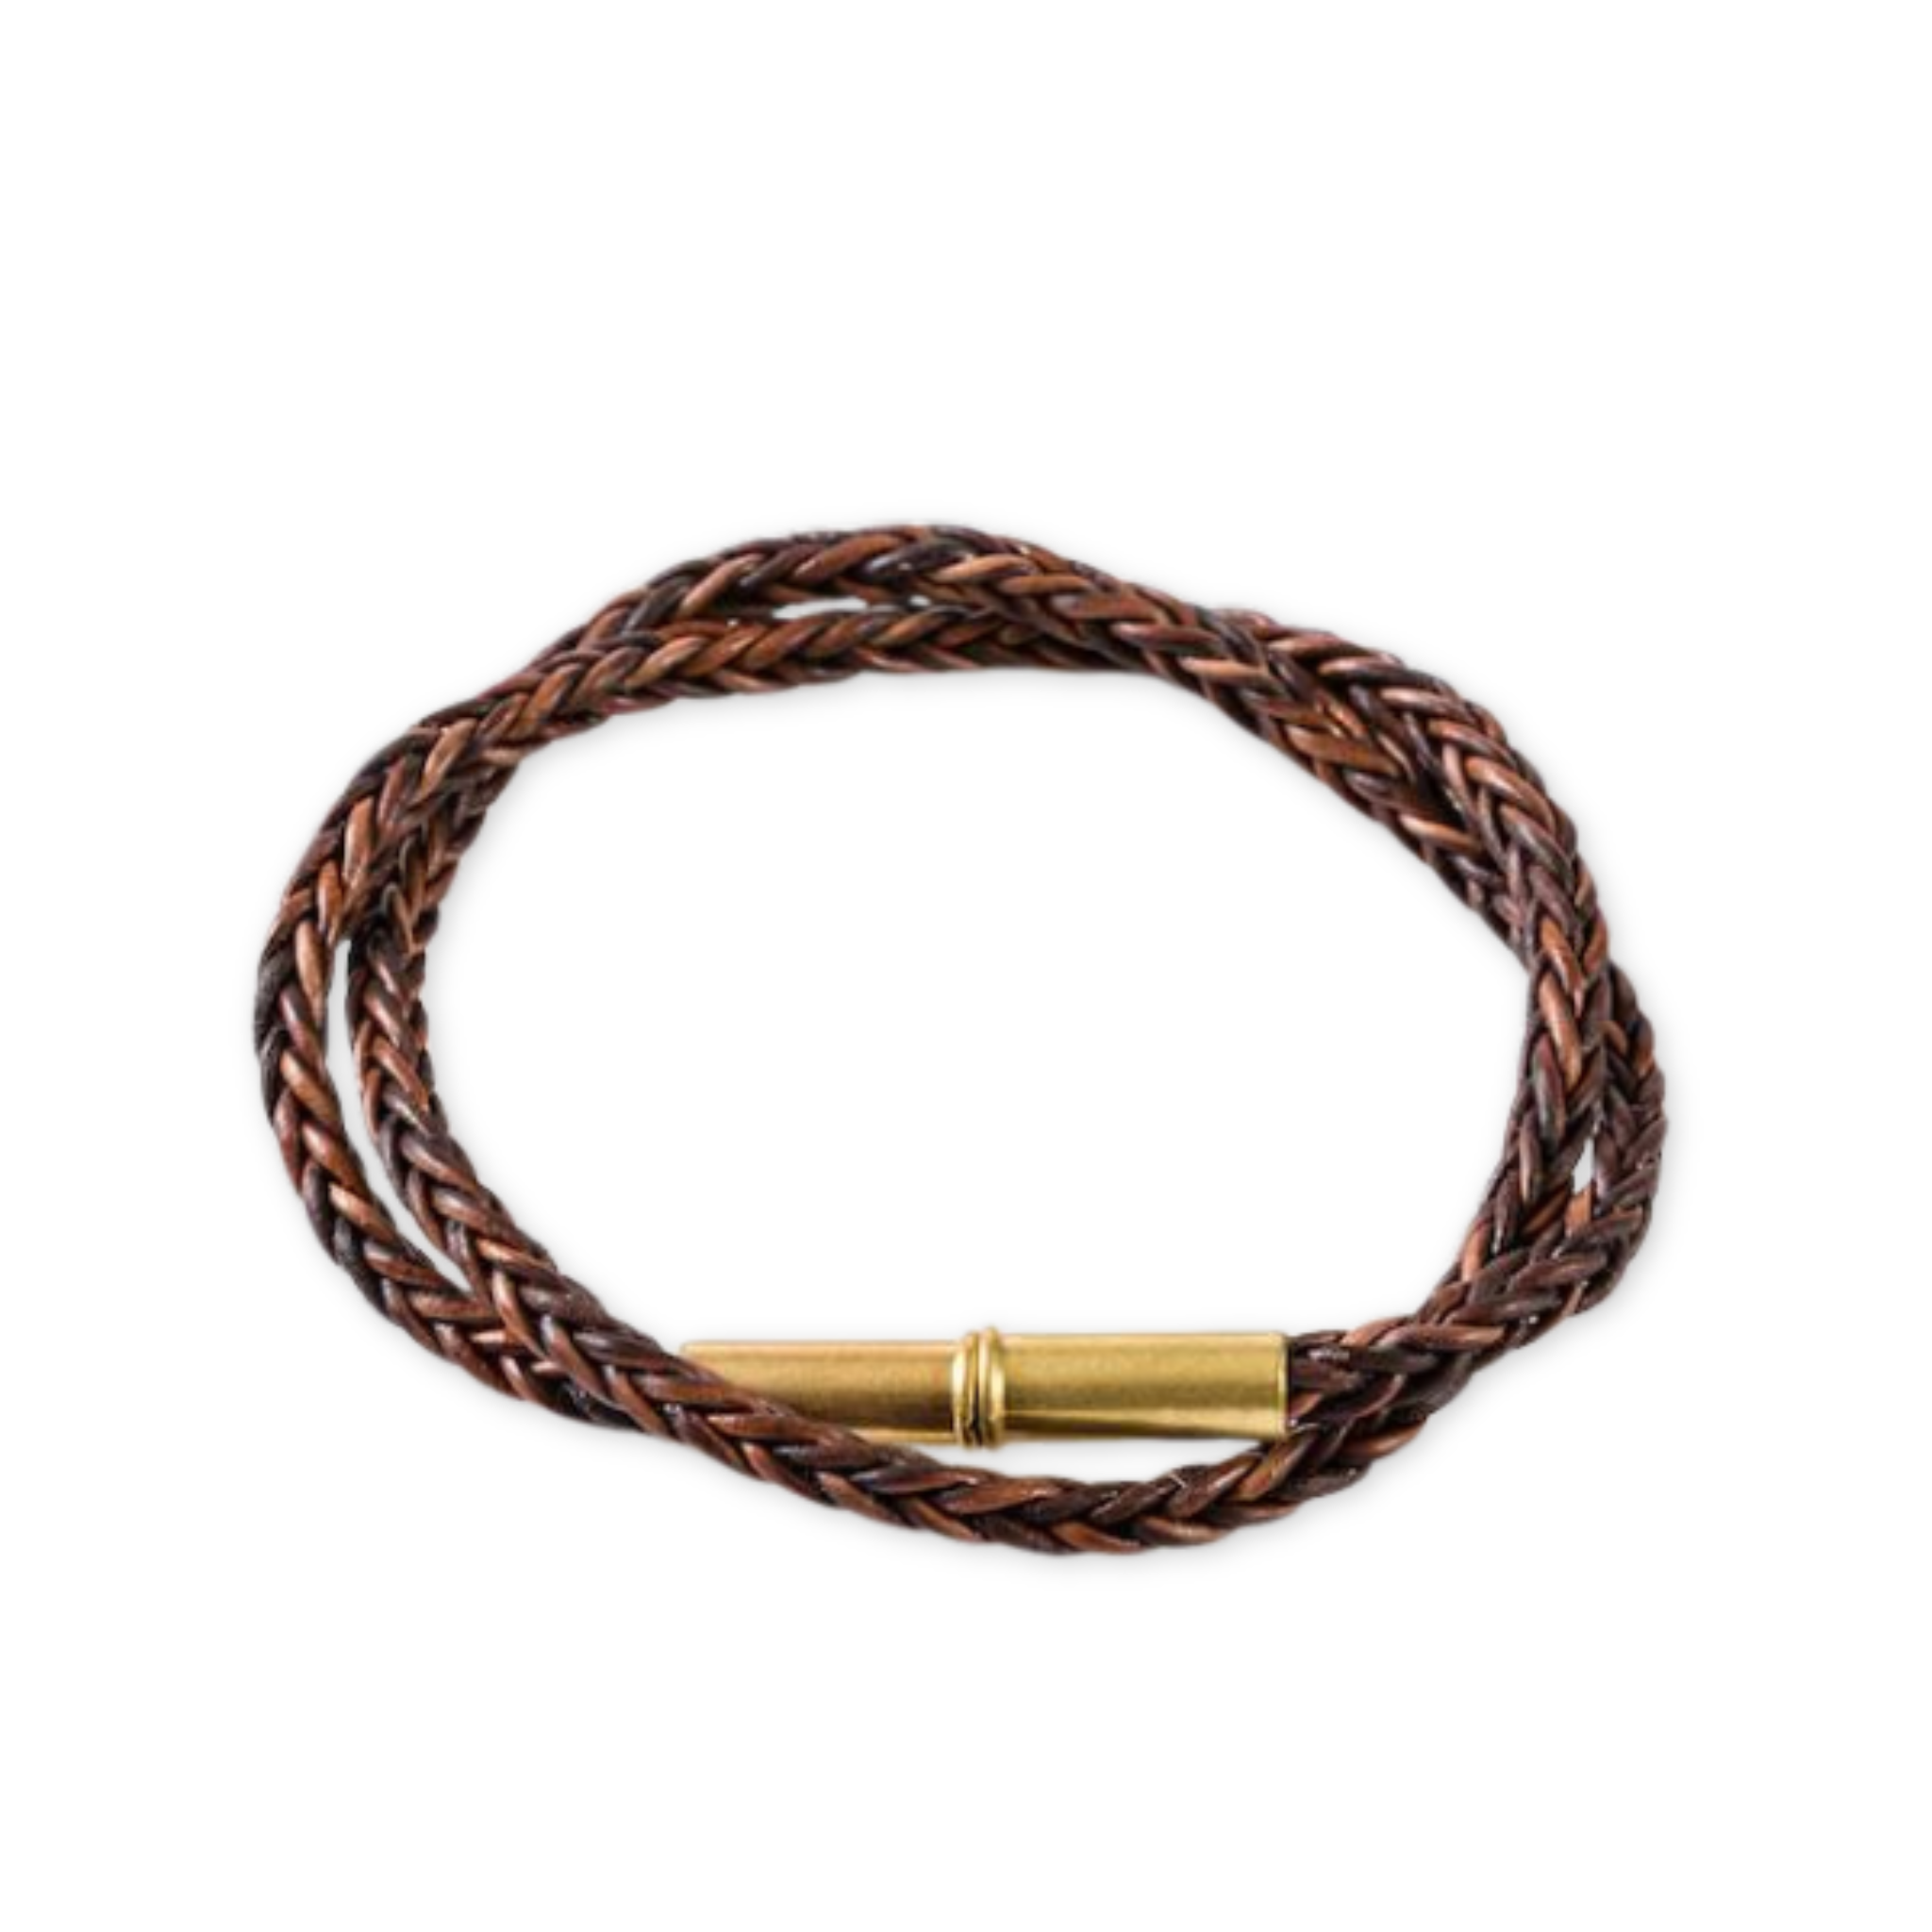 braided cord bracelet with a .22 caliber bullet clasp